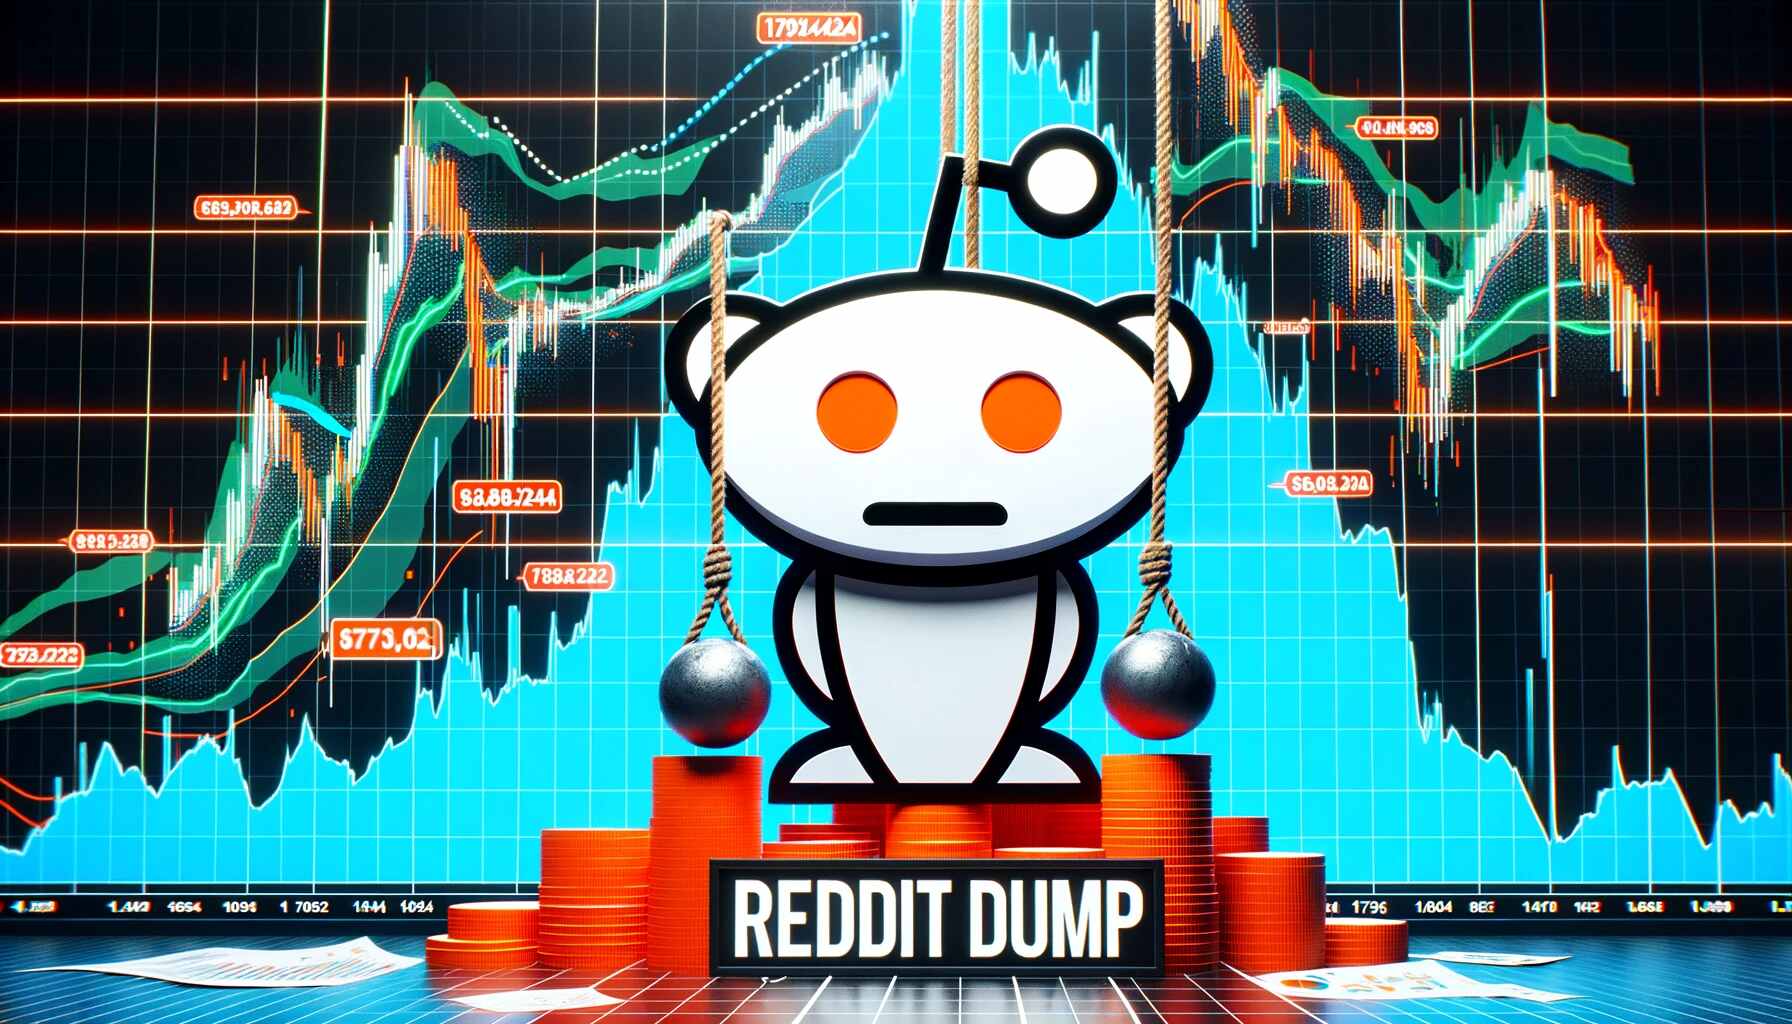 The Reddit MOON Token Controversy: Inside Trading Allegations Surface